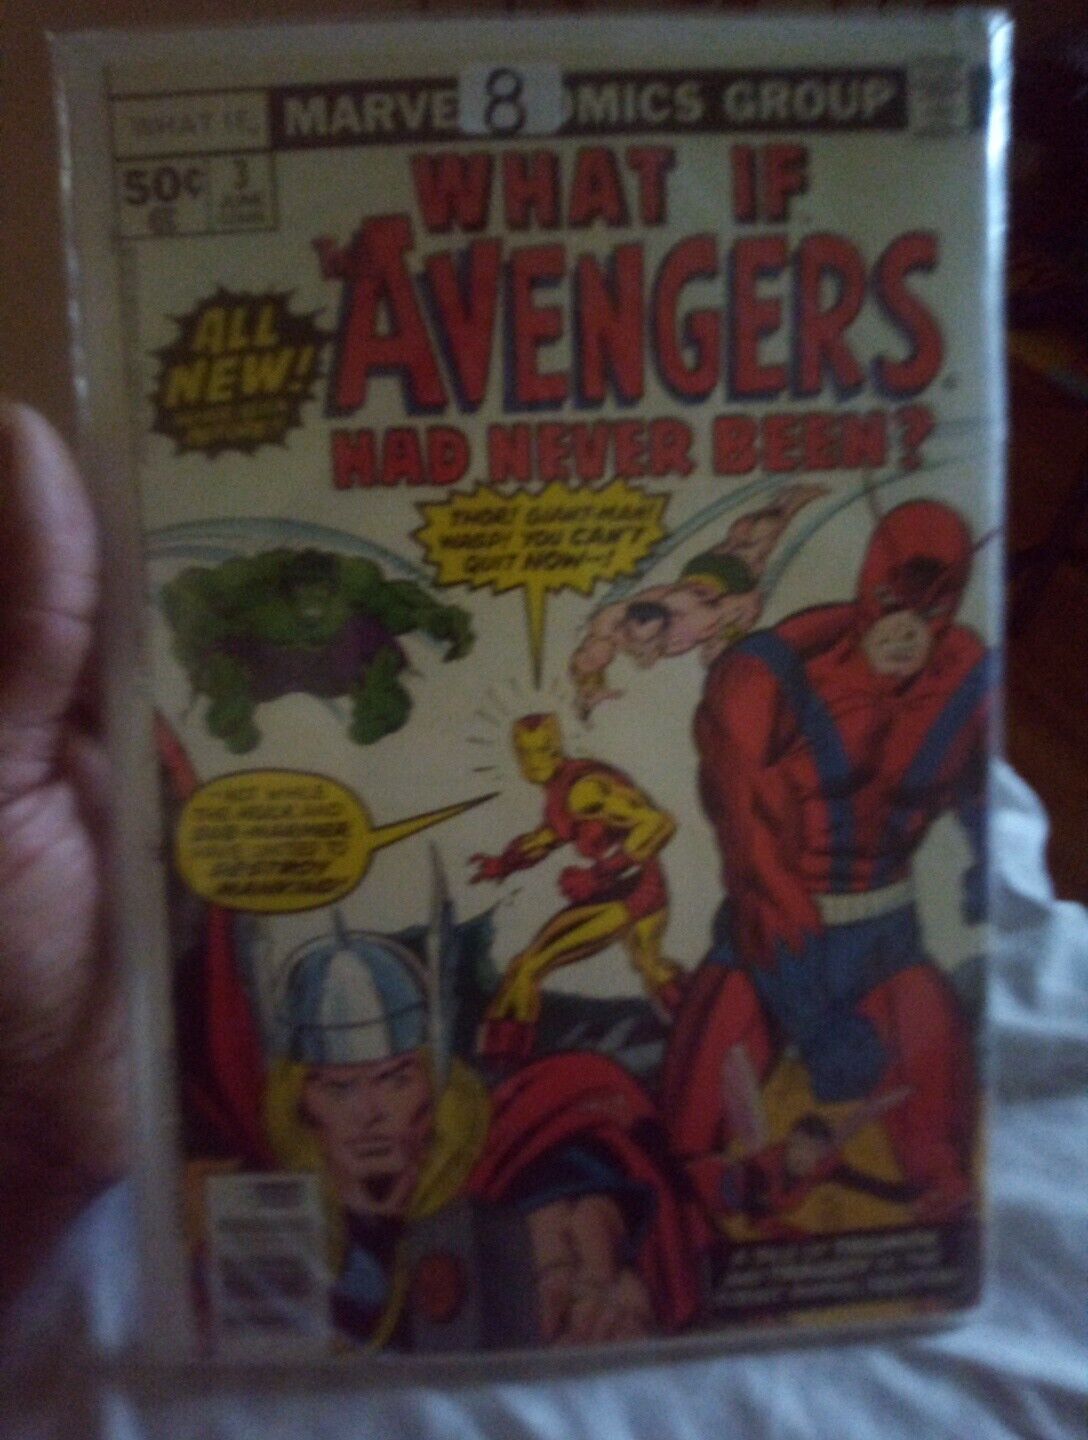 WHAT IF  #3 JUNE 1977 MARVEL COMICS AVENGERS HAD NEVER BEEN 9.4 NM